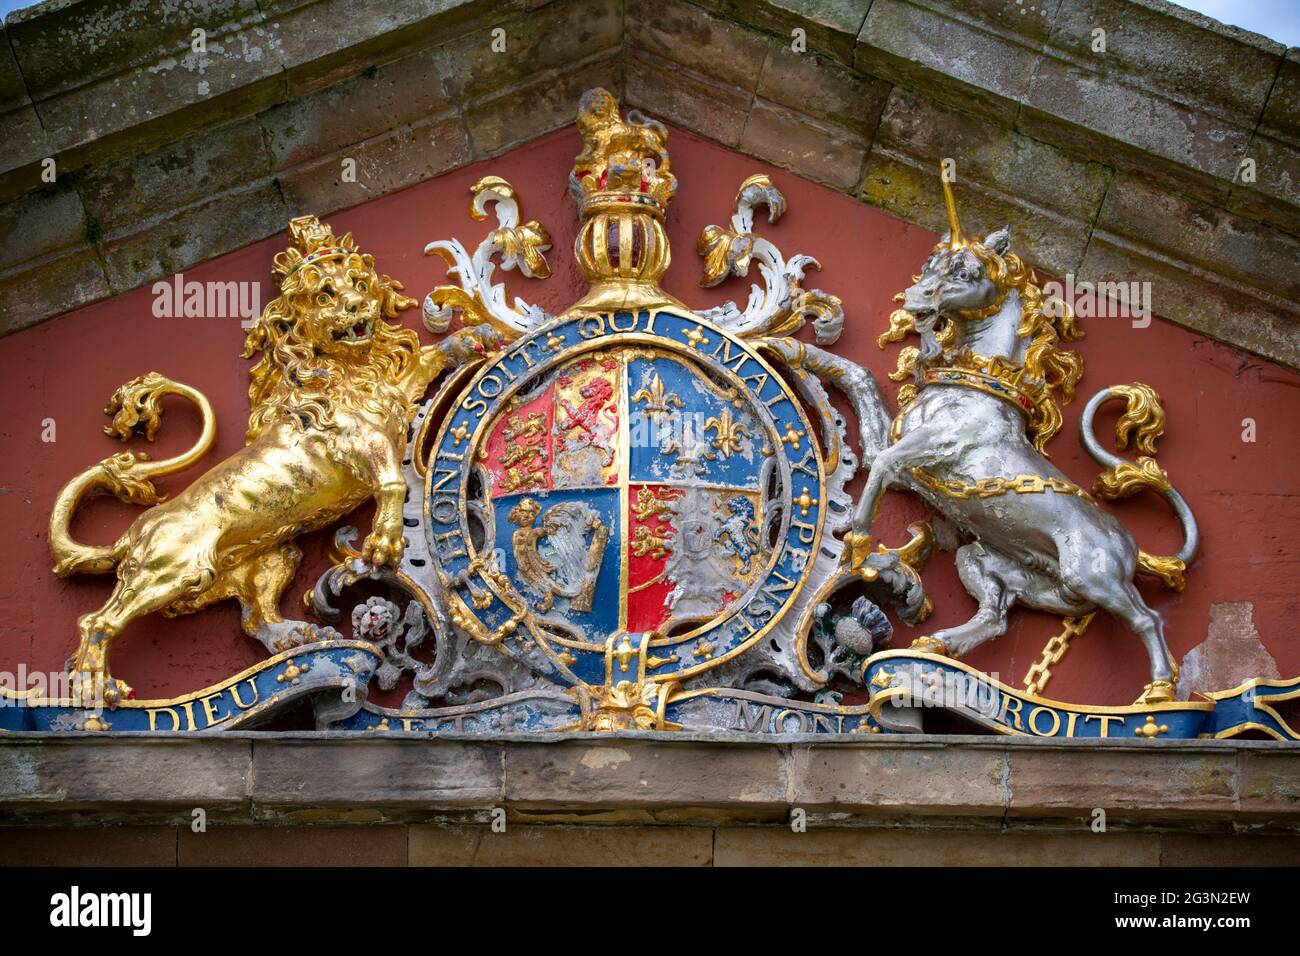 Fort George, Inverness, Scotland, UK. 13 June 2021. Pictured: Close up of the Fort George crest which reads, HON SOIT QUI MAL Y PENSE, DIEU ET MON DROIT, which is seen on the entrance to the Fort. Scenes from Fort George.  Credit: Colin Fisher/CDFIMAGES.COM Stock Photo